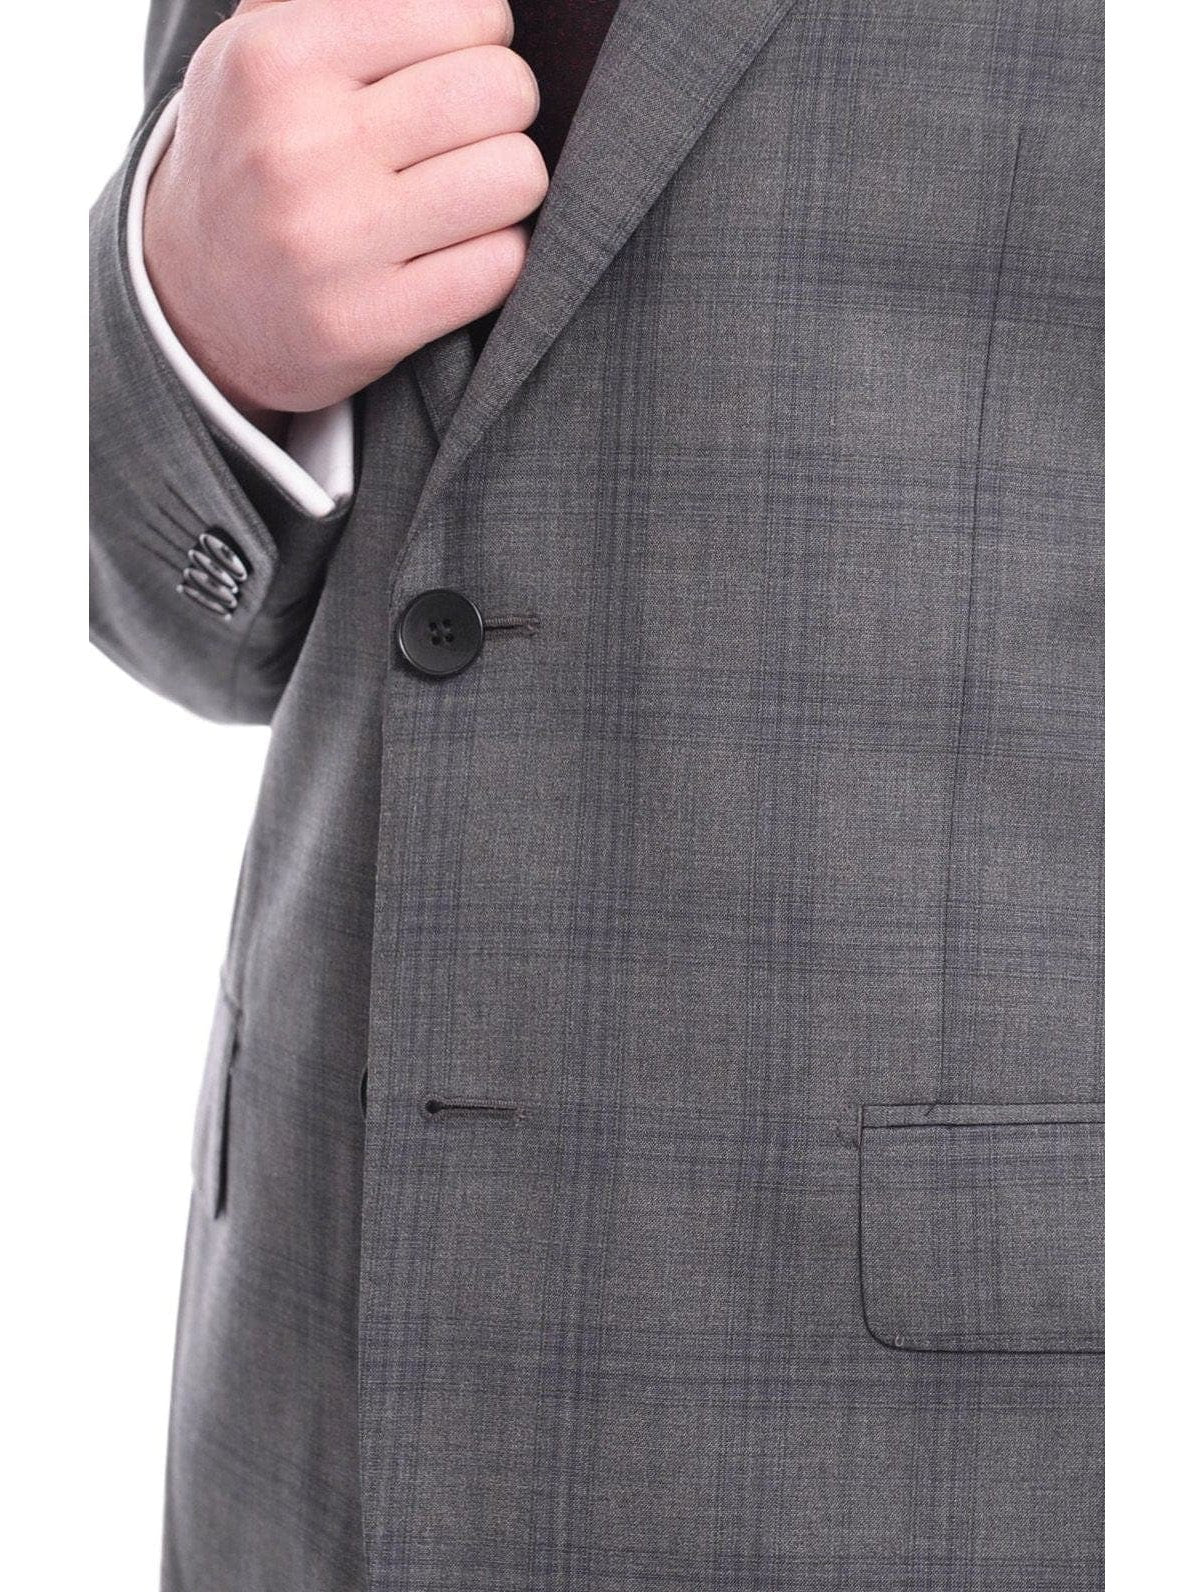 Napoli TWO PIECE SUITS Napoli Slim Fit Gray &amp; Blue Plaid Two Button Half Canvassed Wool Suit